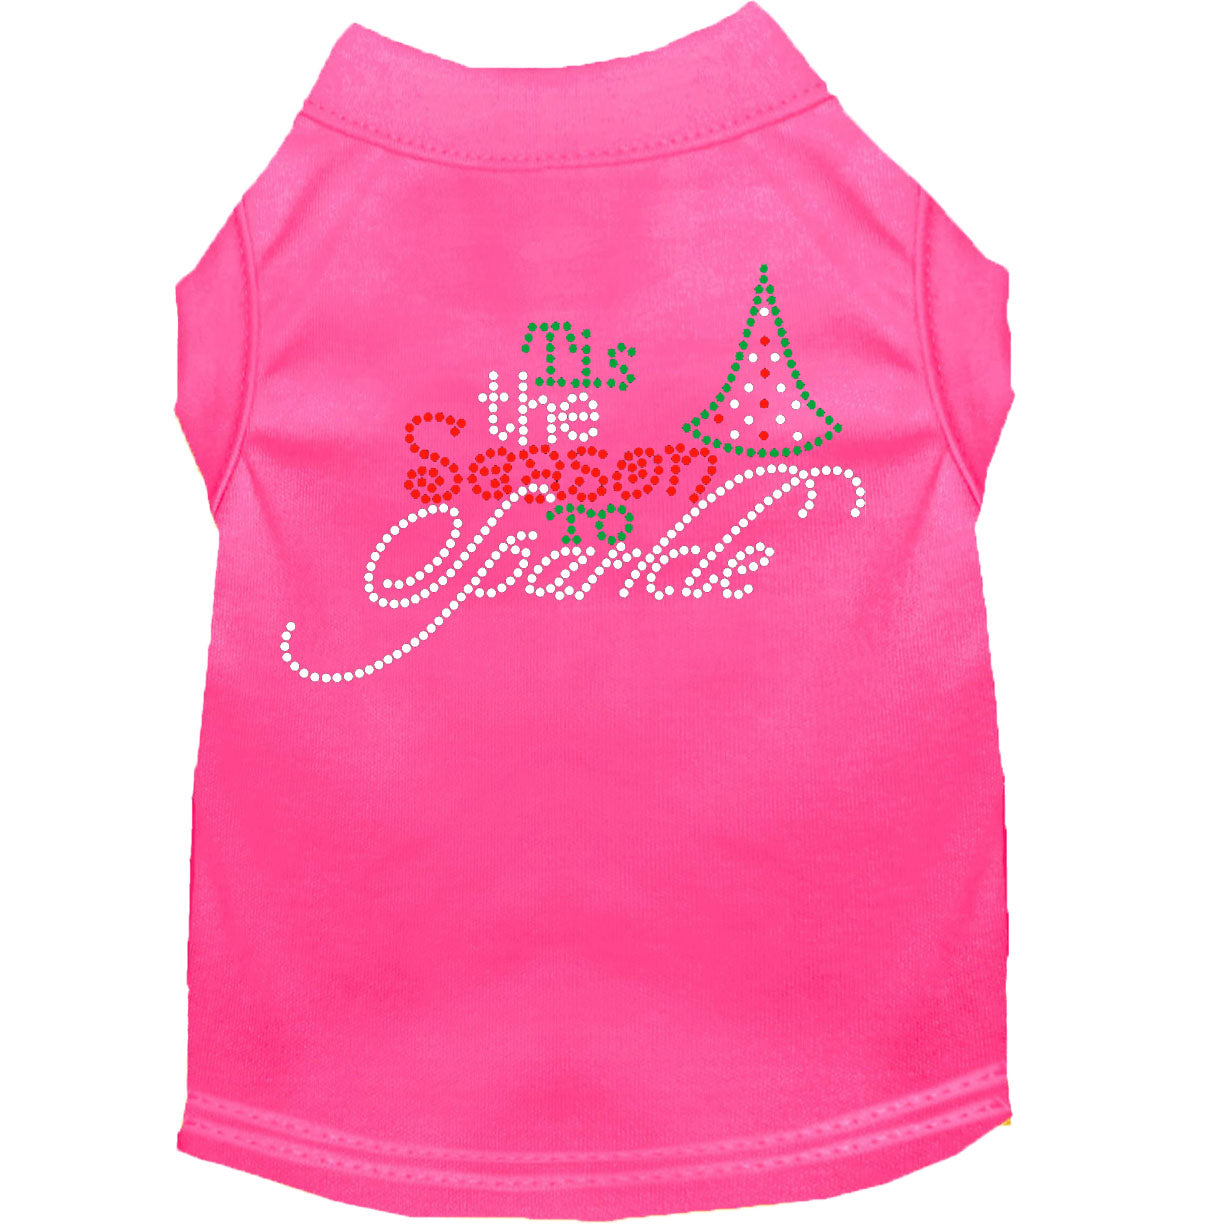 Tis the Season to Sparkle Rhinestone Shirts for Cats and Dogs